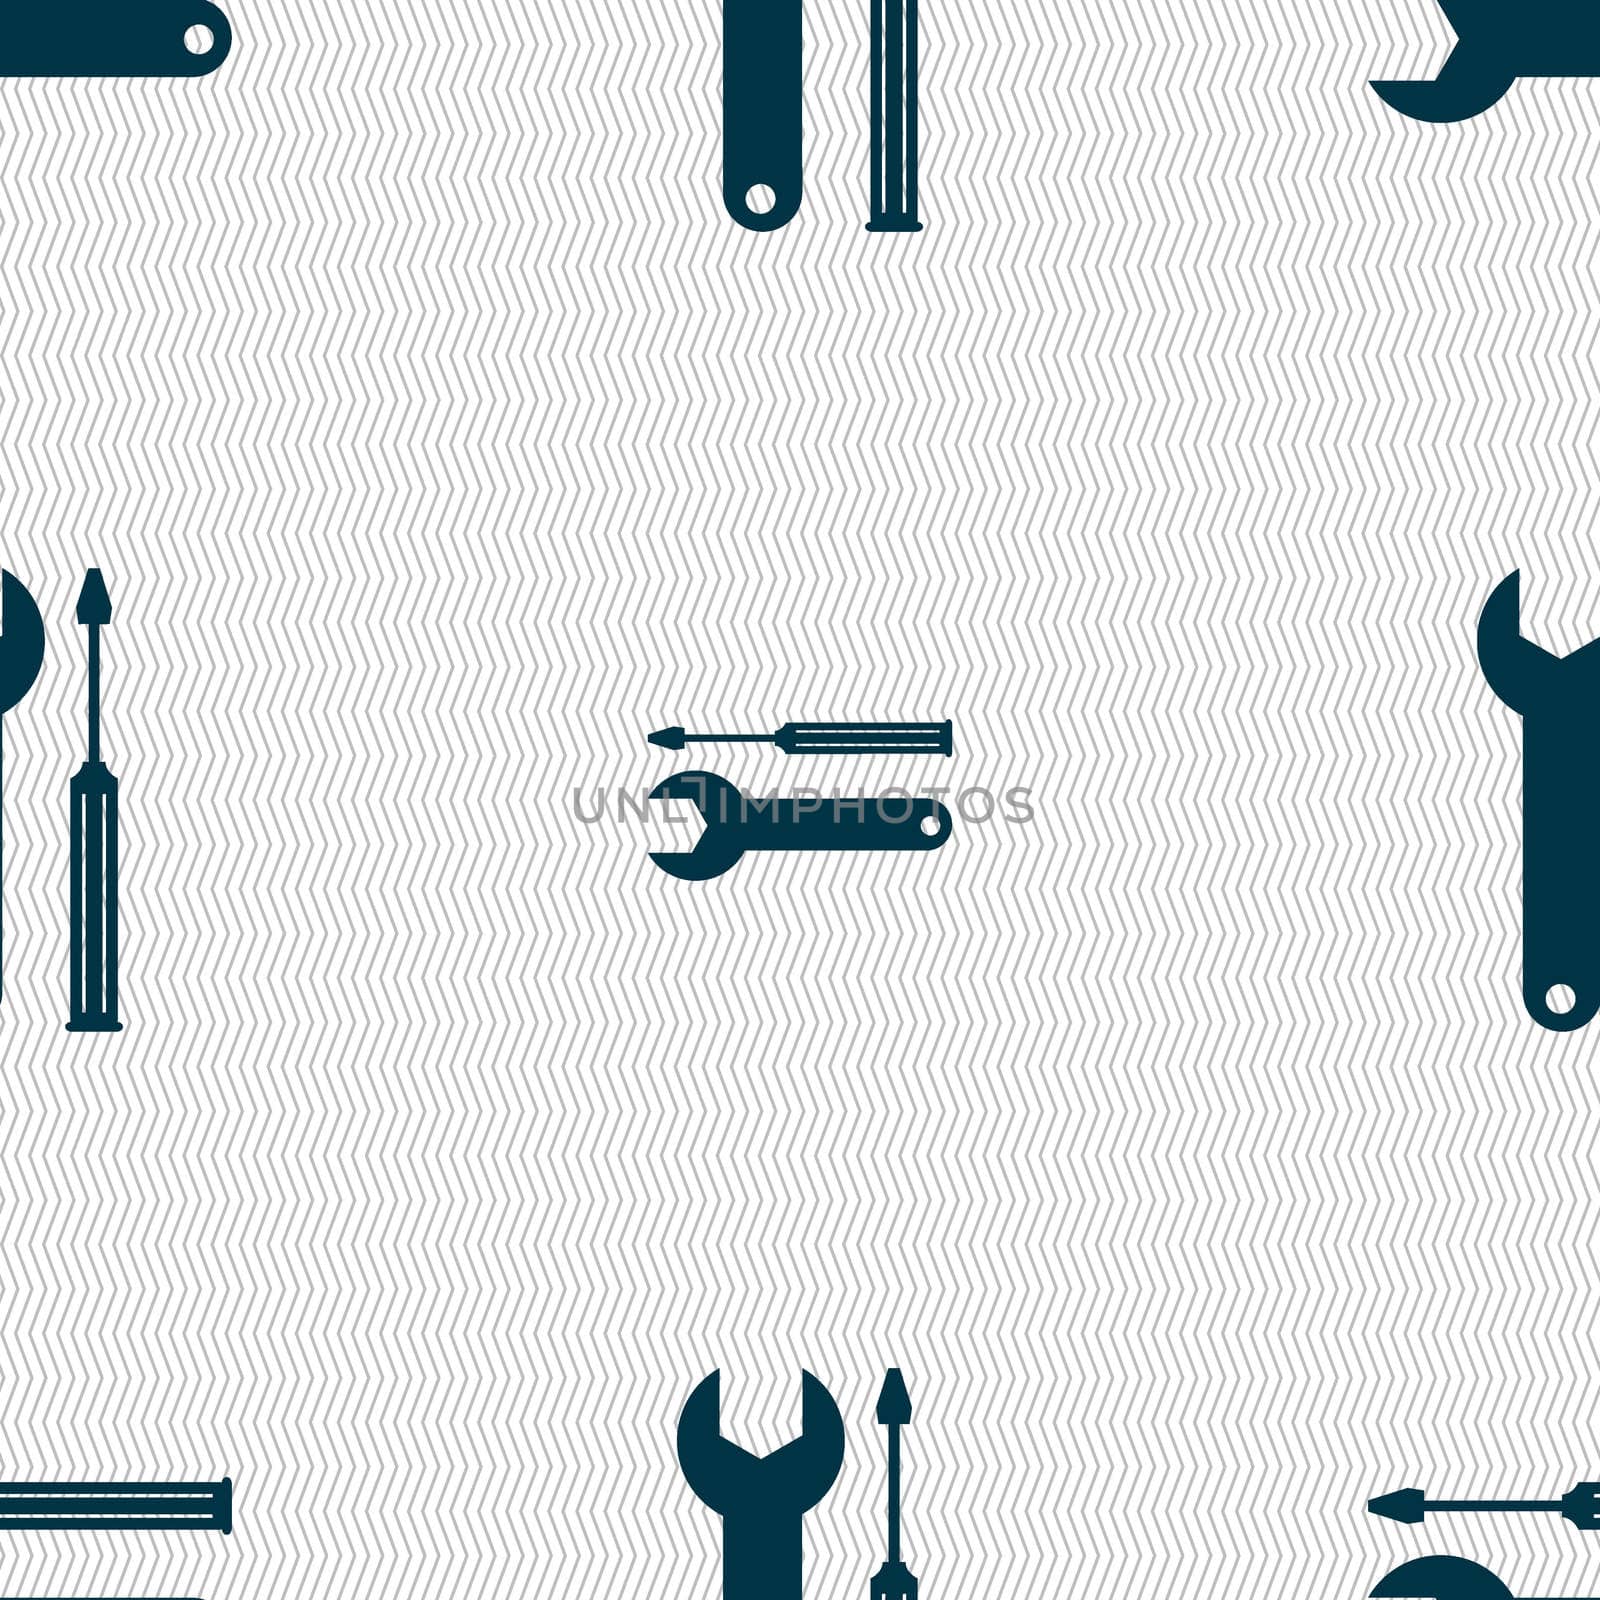 Repair tool sign icon. Service symbol. screwdriver with wrench. Seamless abstract background with geometric shapes. illustration